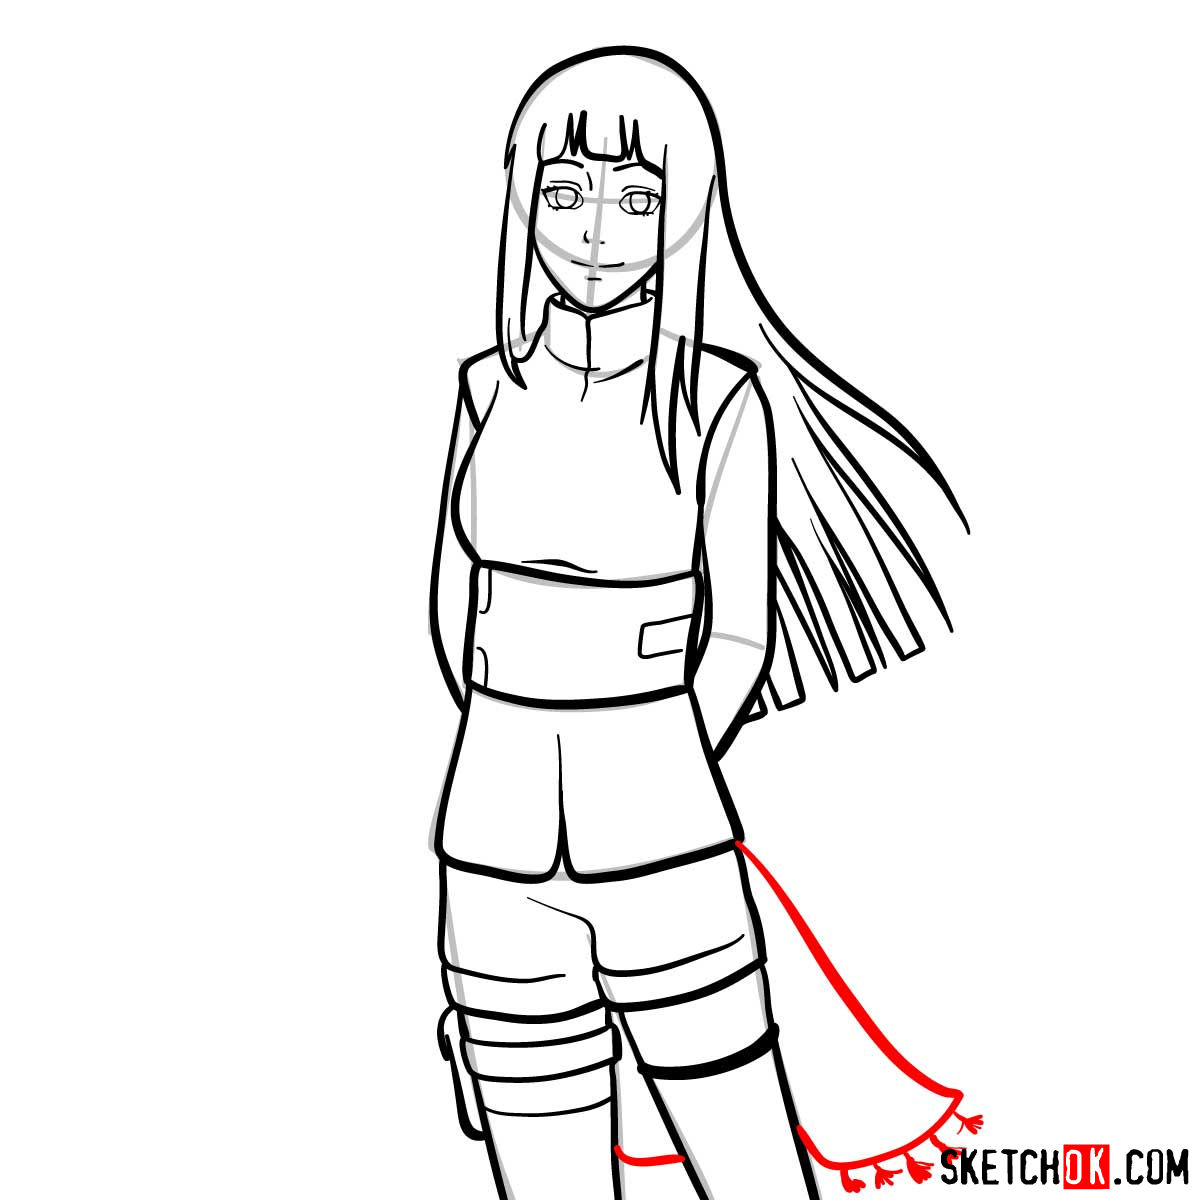 How to draw Hinata from Naruto anime - step 11